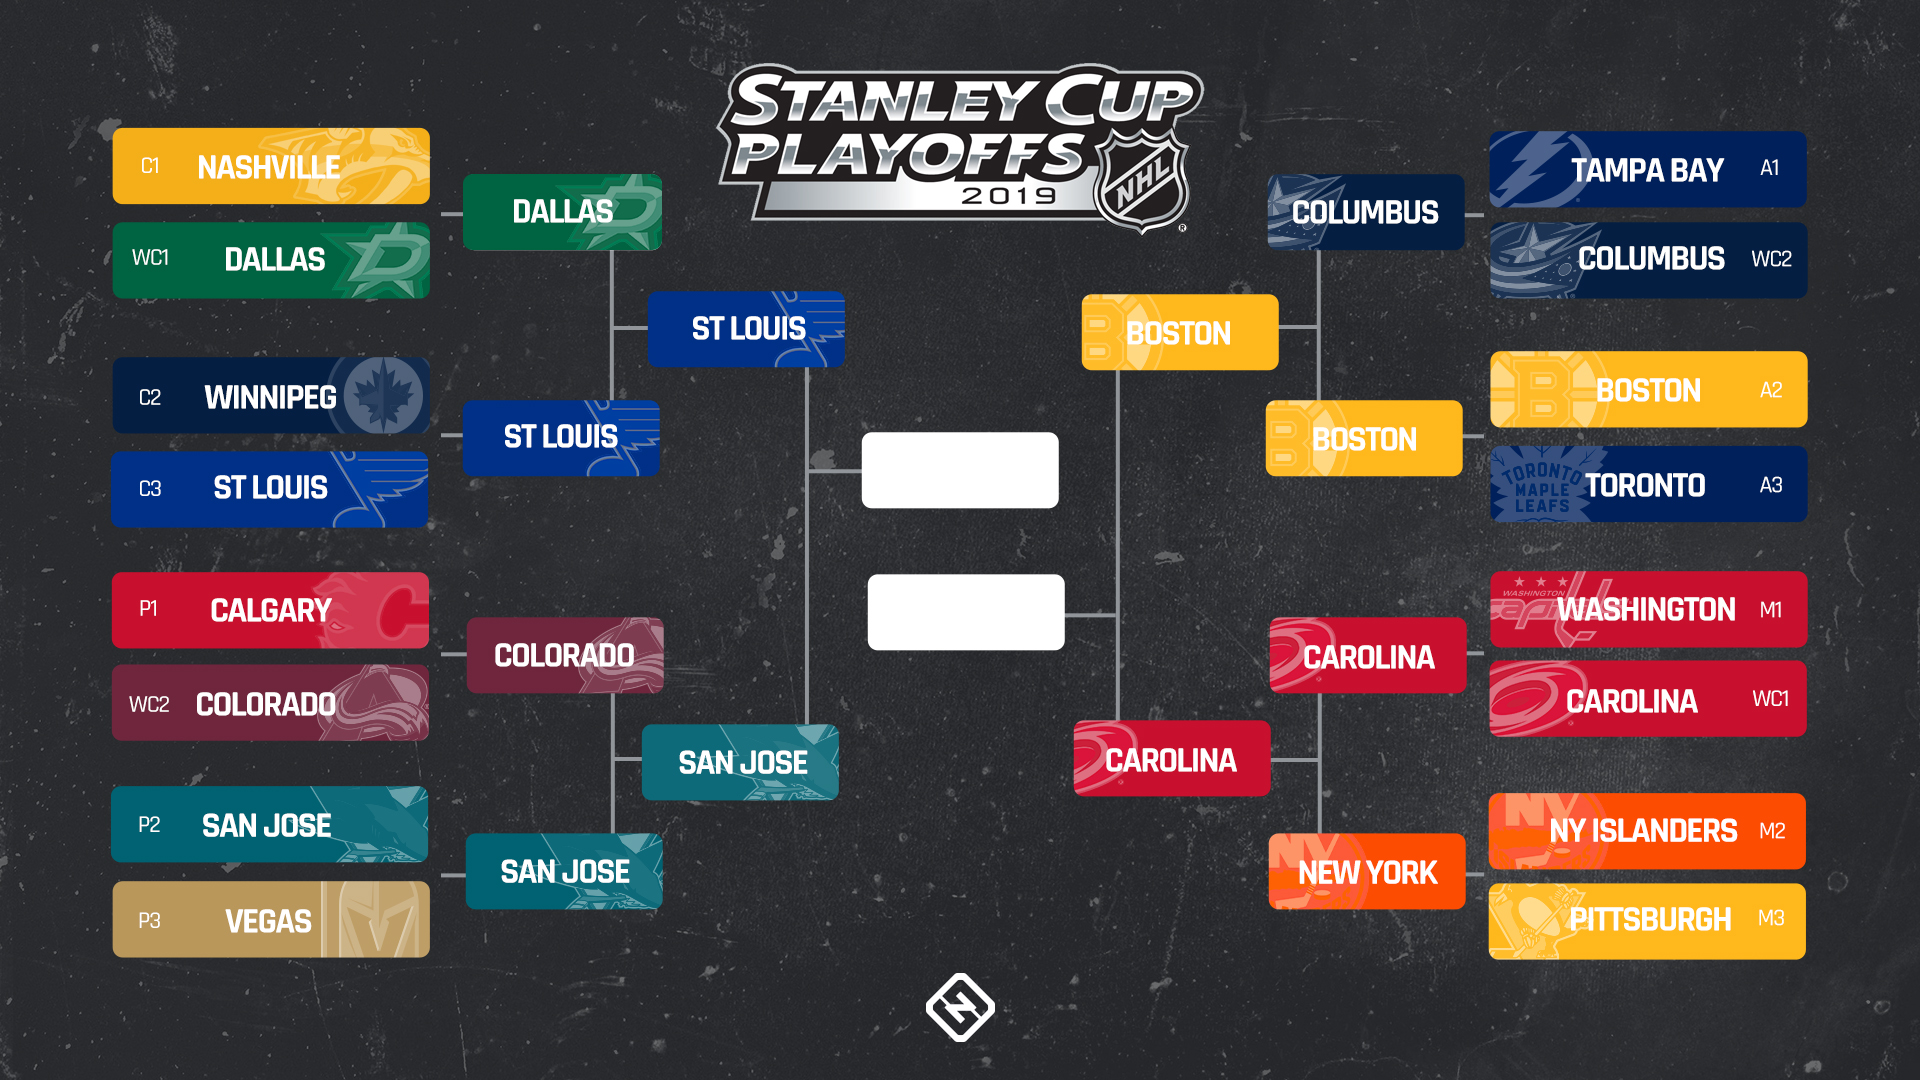 NHL playoffs bracket 2019: Full schedule, dates, times, TV channels for